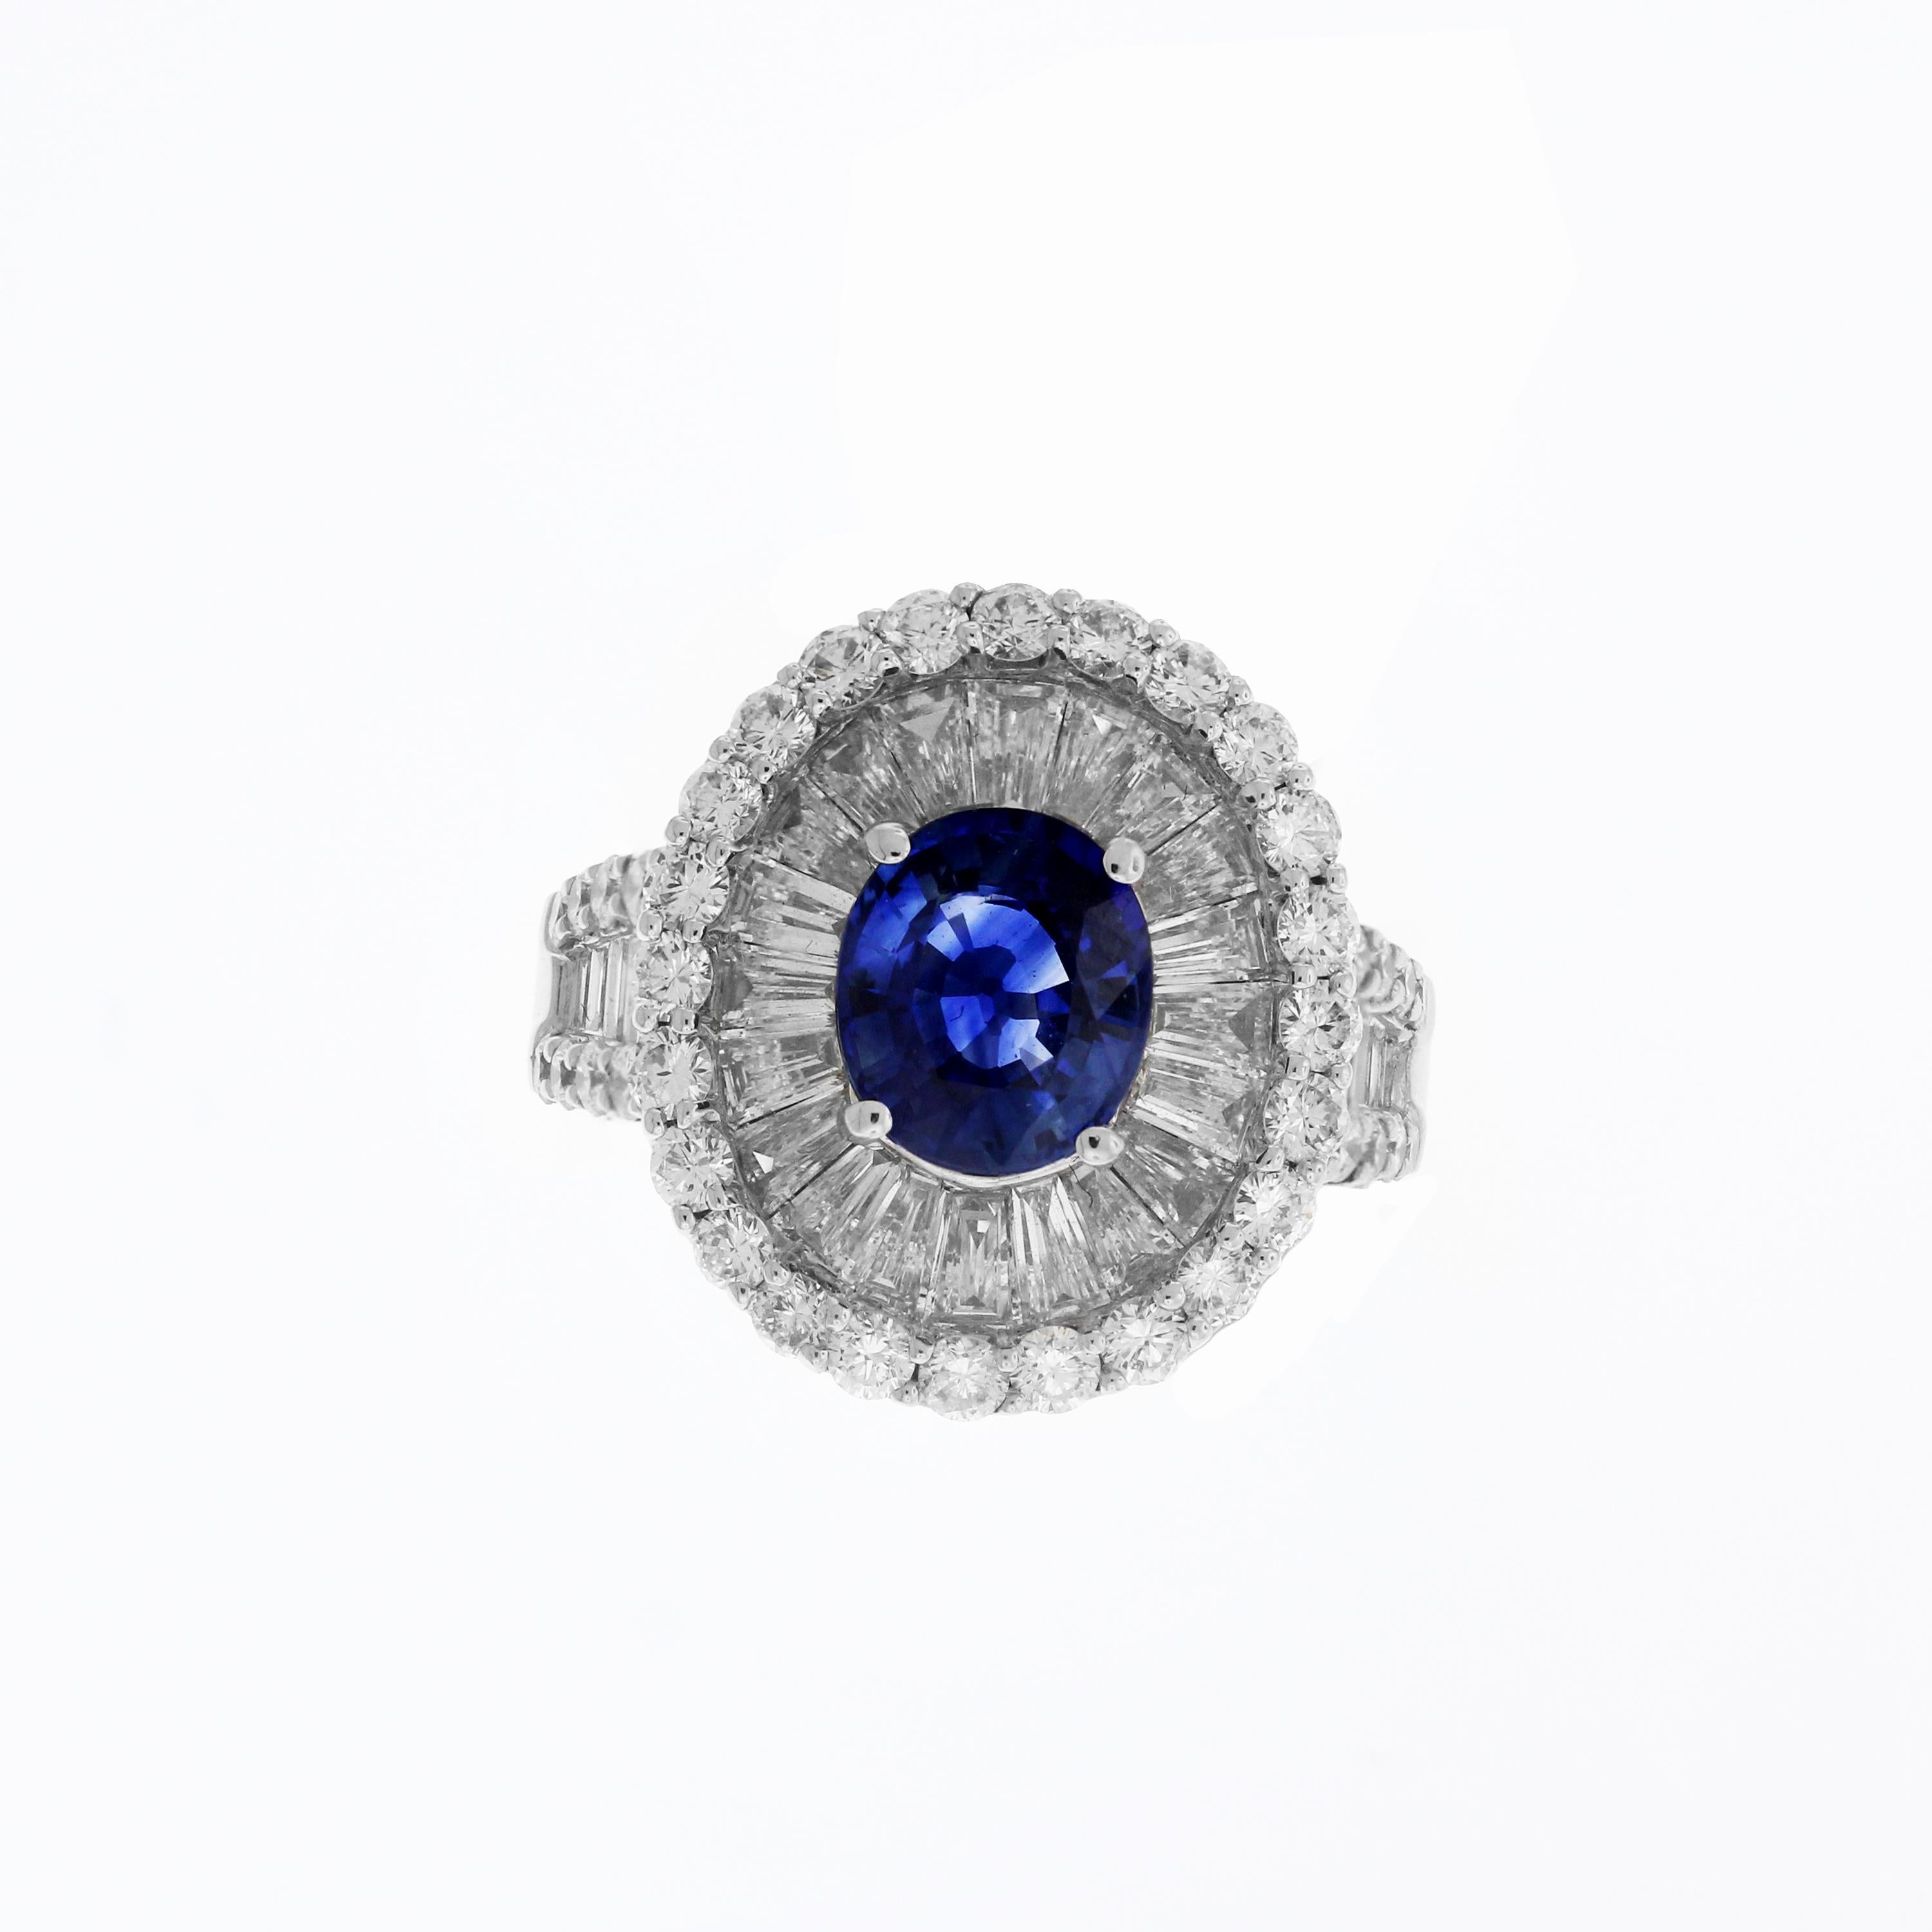 IF YOU ARE REALLY INTERESTED, CONTACT US WITH ANY REASONABLE OFFER. WE WILL TRY OUR BEST TO MAKE YOU HAPPY!

18K White Gold Baguette and Round Cut Diamond Ring with Round cut Blue Sapphire Center 

2 carat approximate round cut Blue Sapphire